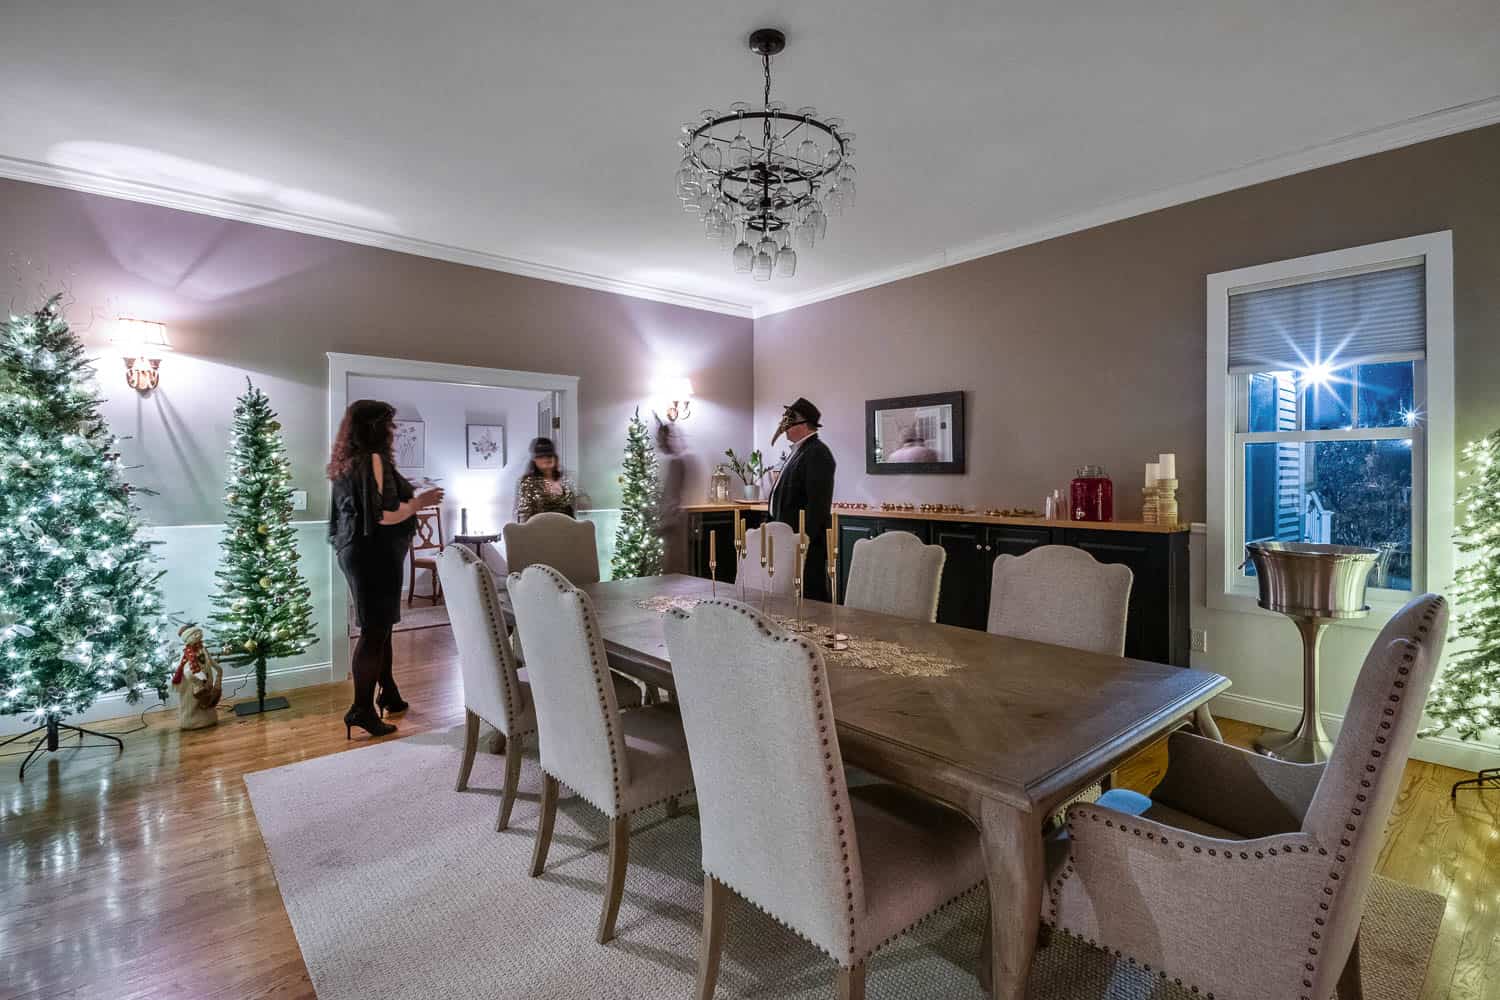 Interior of a dining room at Ash Point Estate, decorated for Christmas with multiple trees, featuring three people talking.